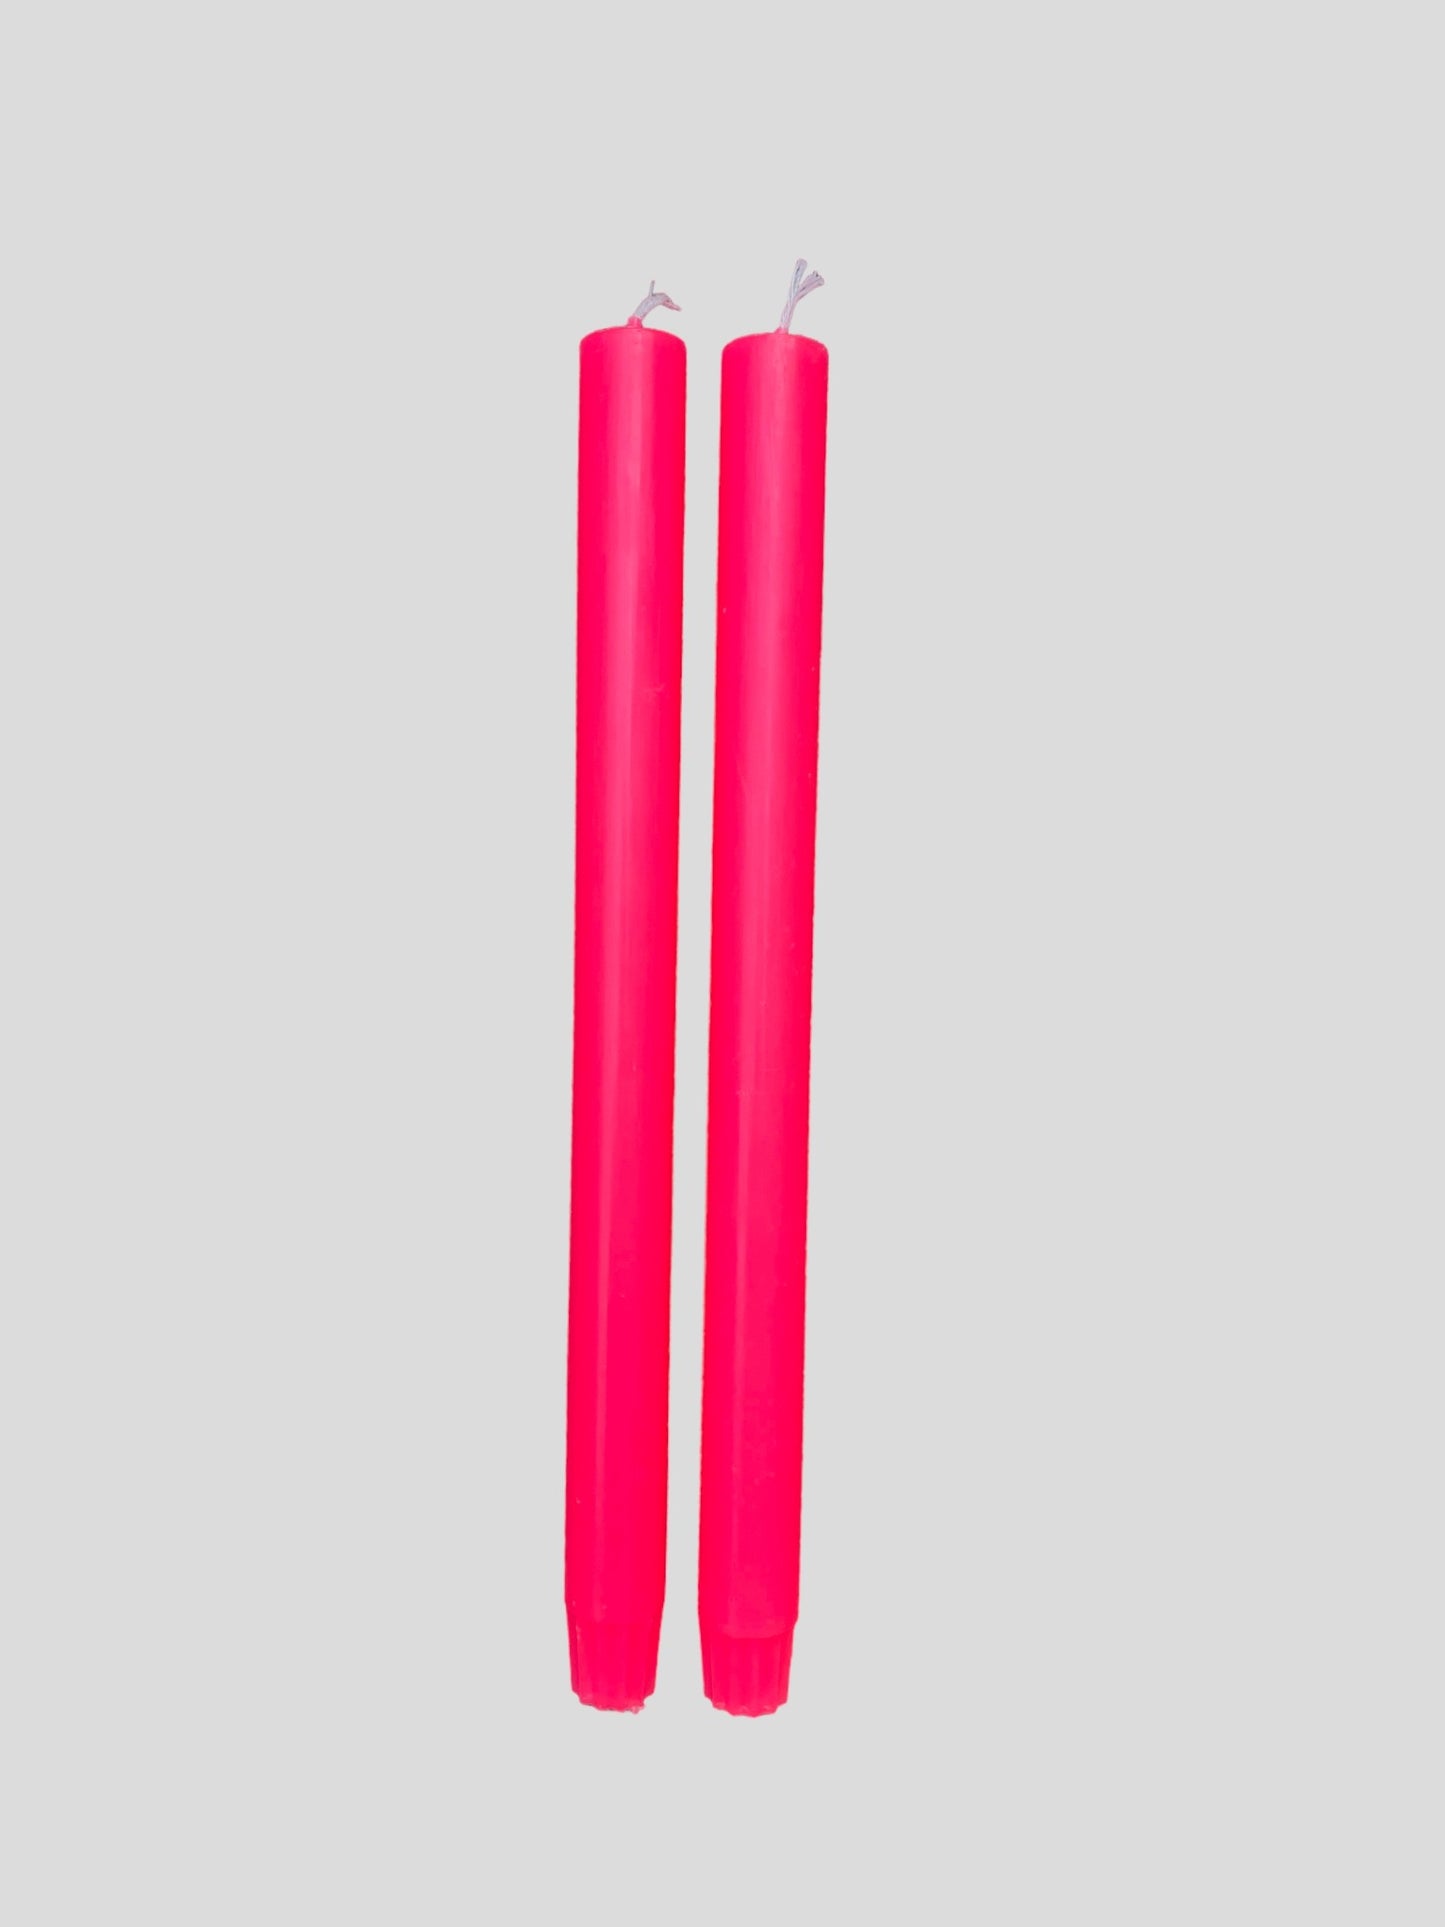 A pair of fluorescent pink candles from True Grace